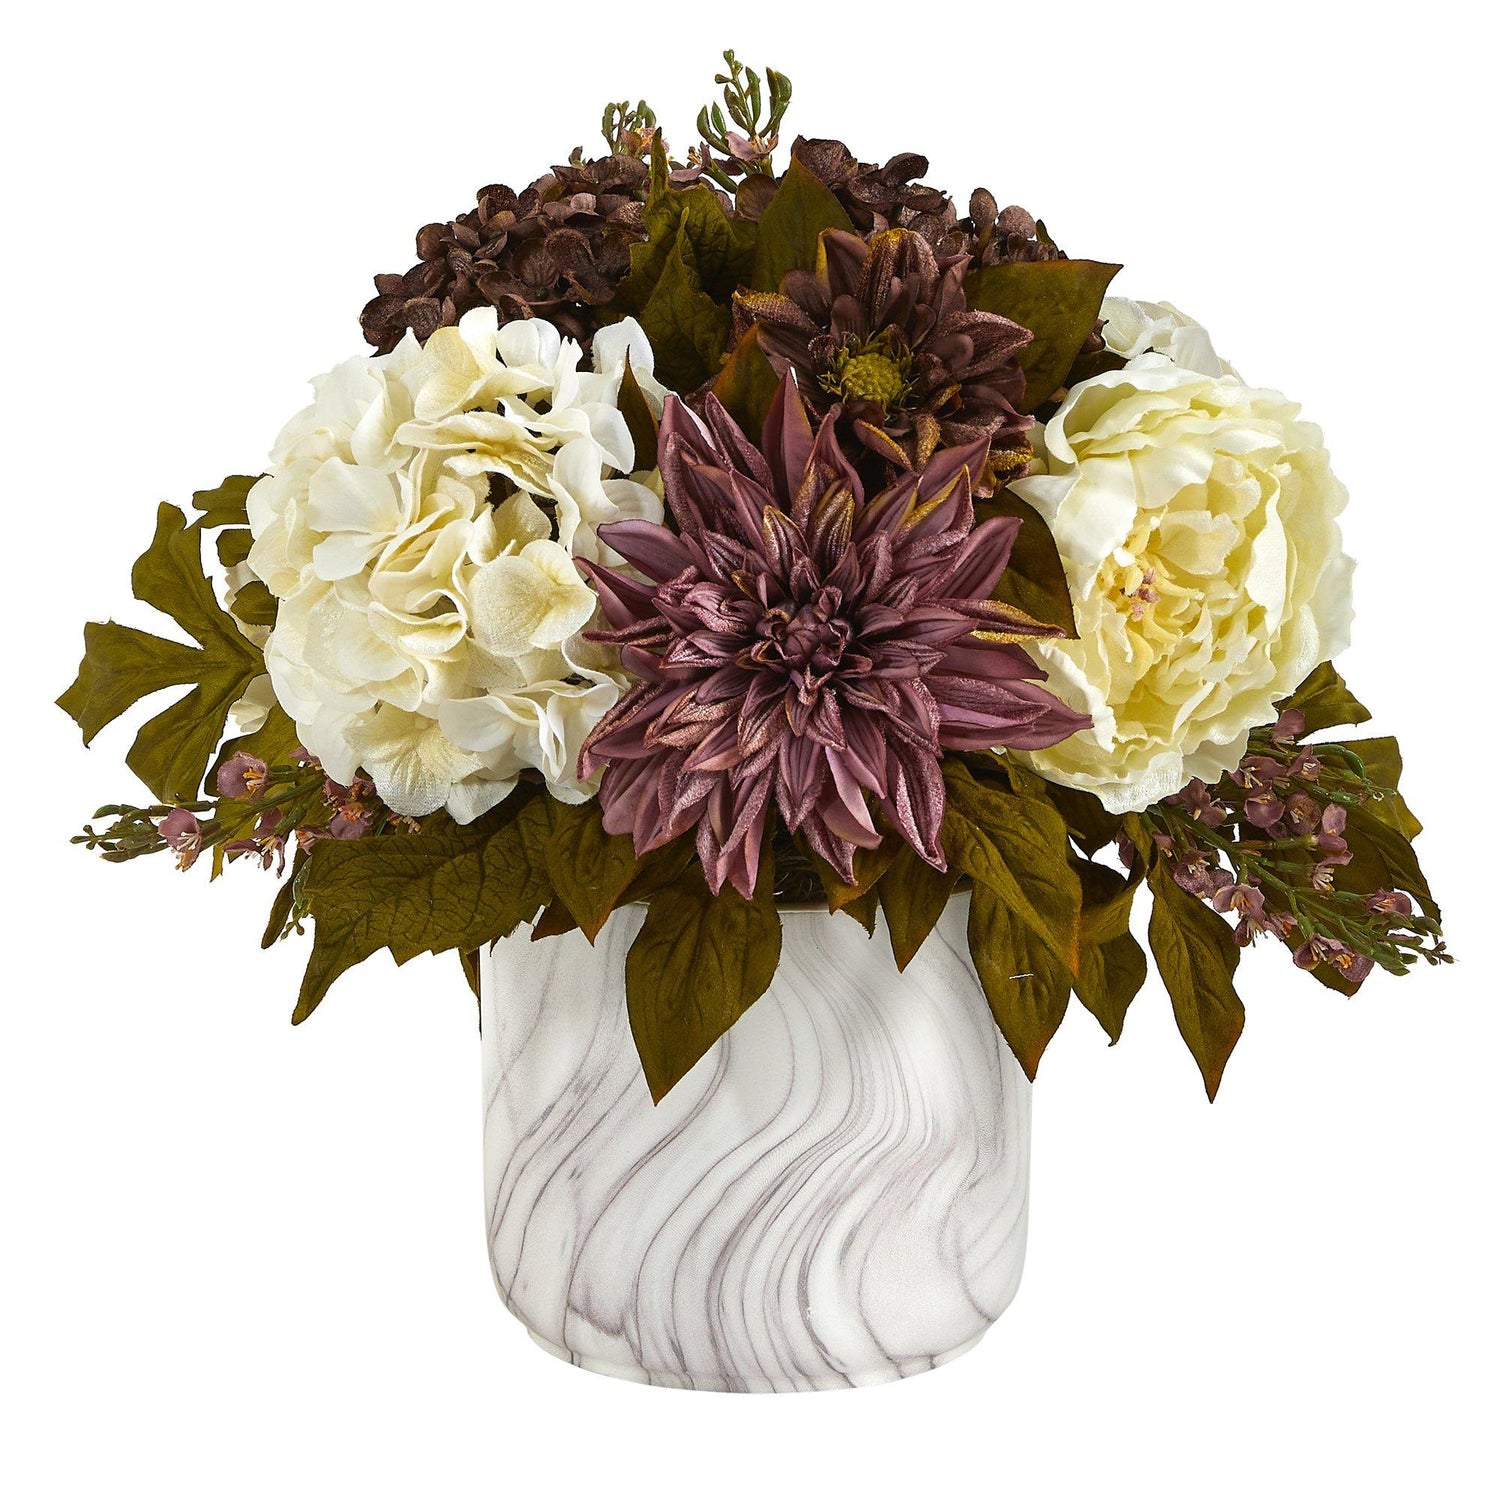 15” Peony, Hydrangea and Dahlia Artificial Arrangement in Marble Finished Vase